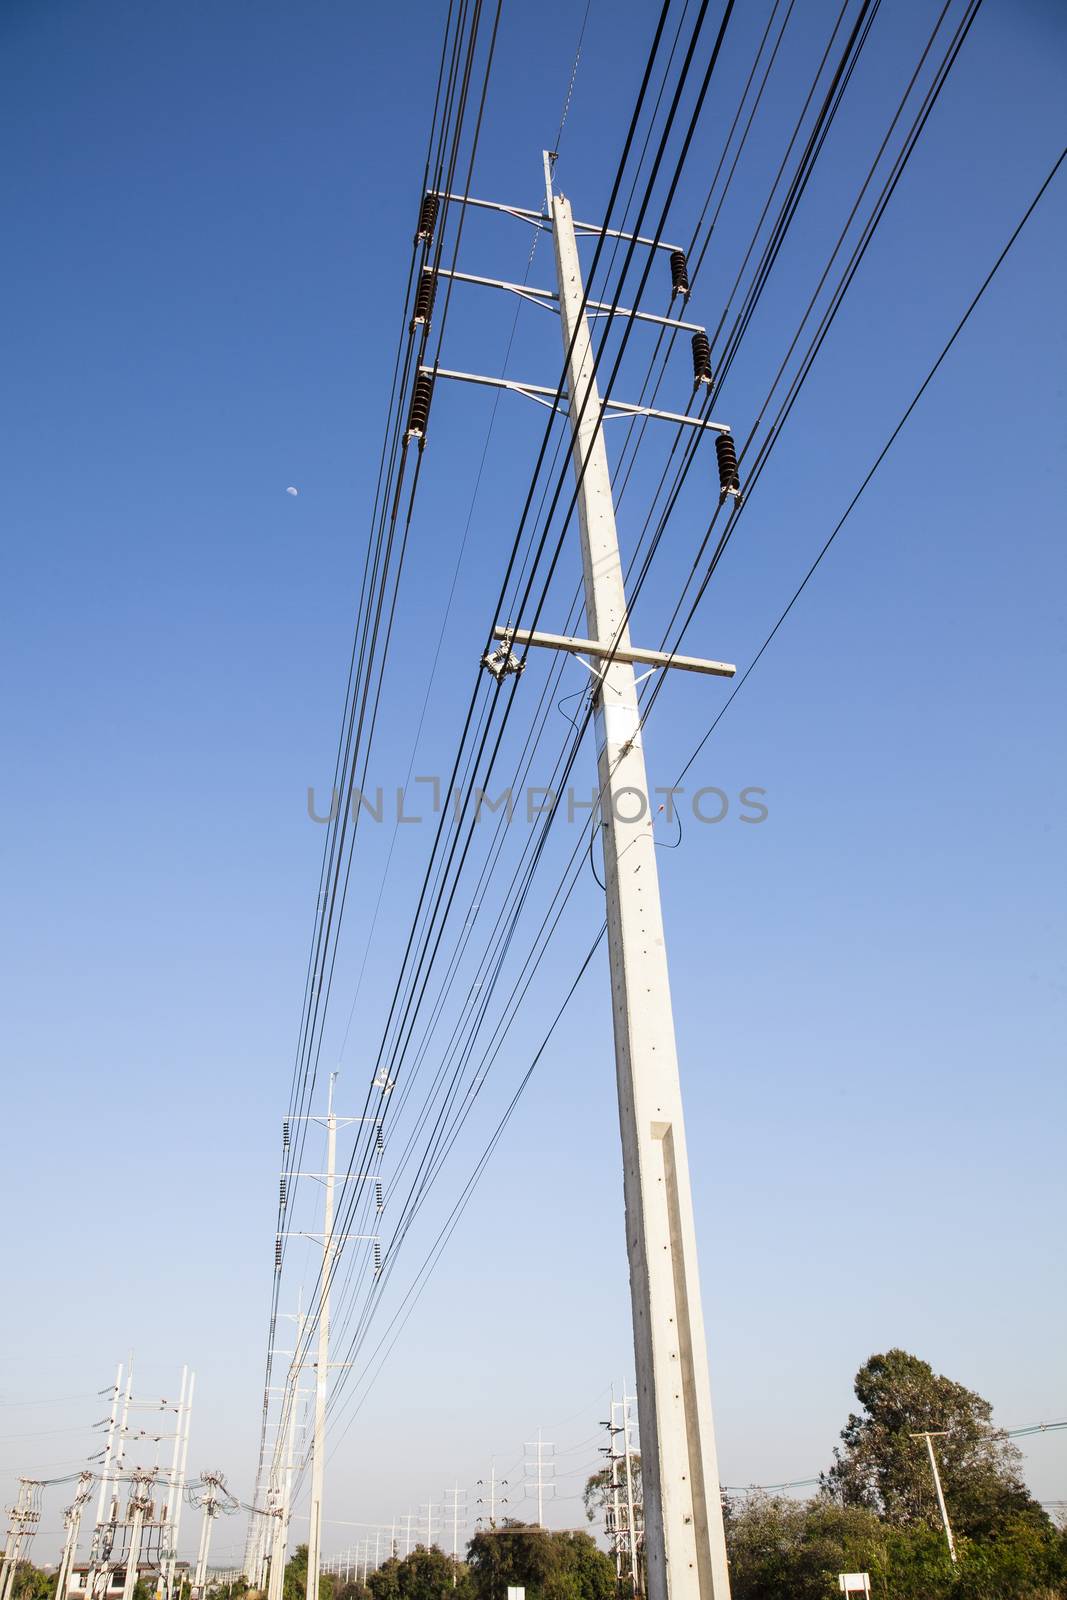  Electrical power poles in The electricity needed to power an el by jee1999